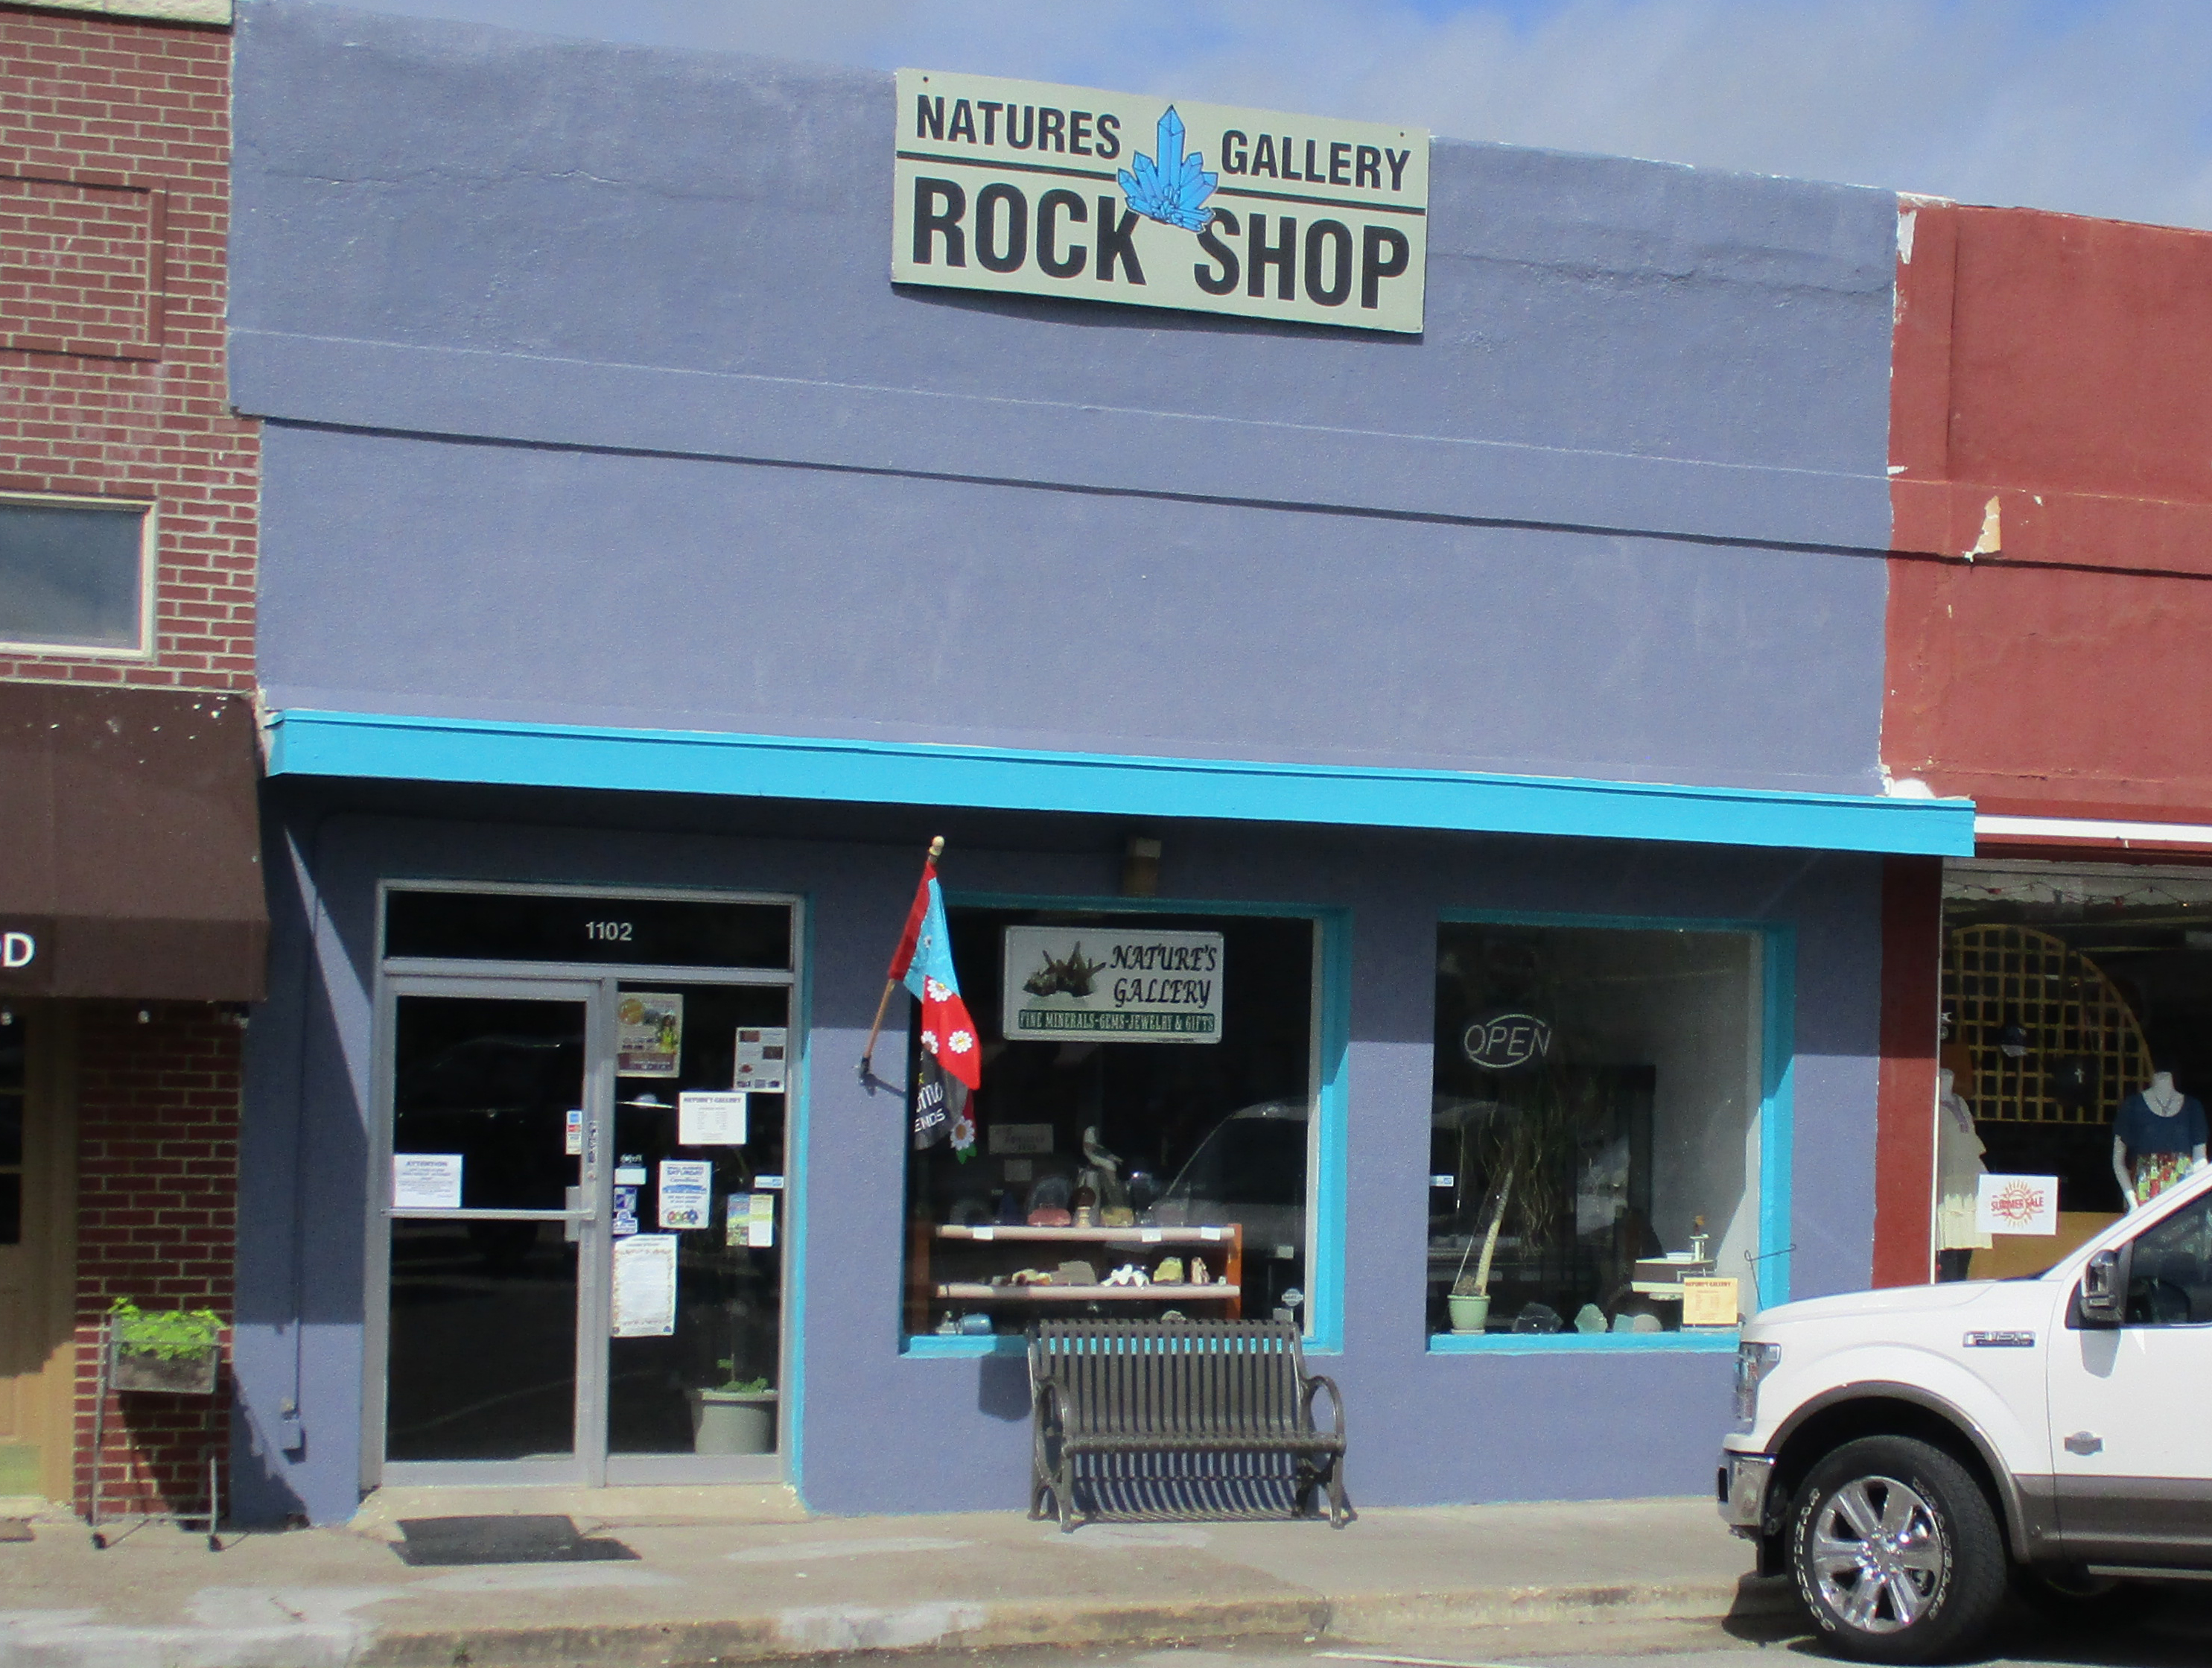 Outside view of the shop